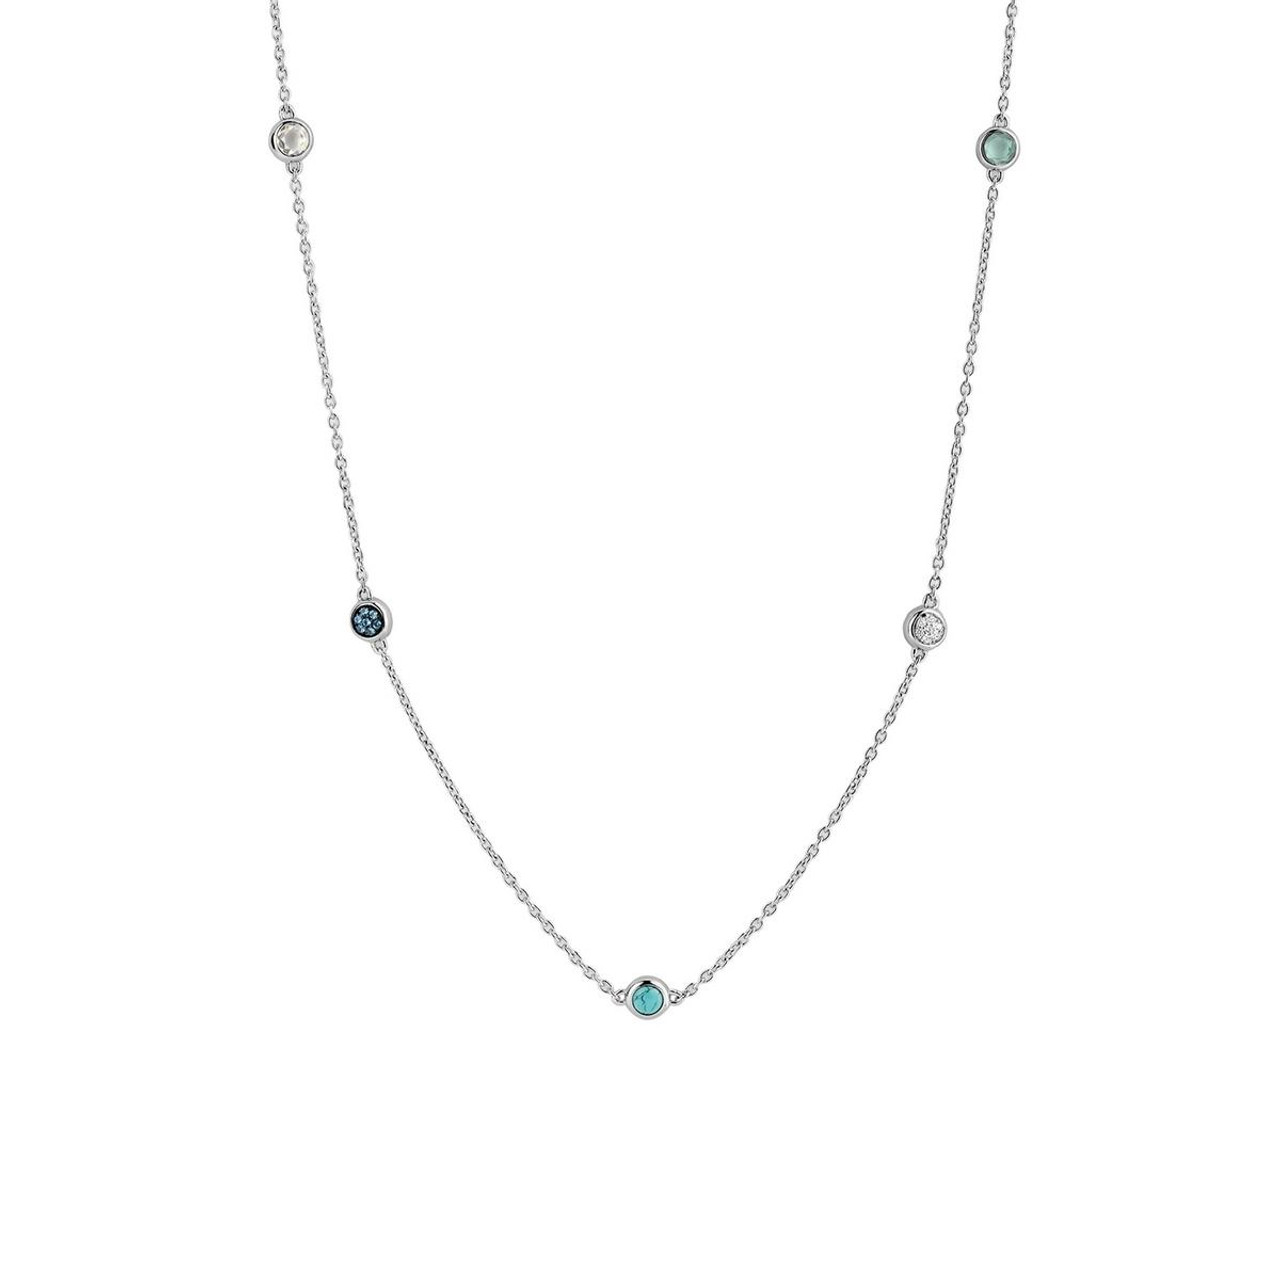 Amali Oxidized Sterling Silver Turquoise Station Necklace N-1435-TQ -  Hurdle's Jewelry